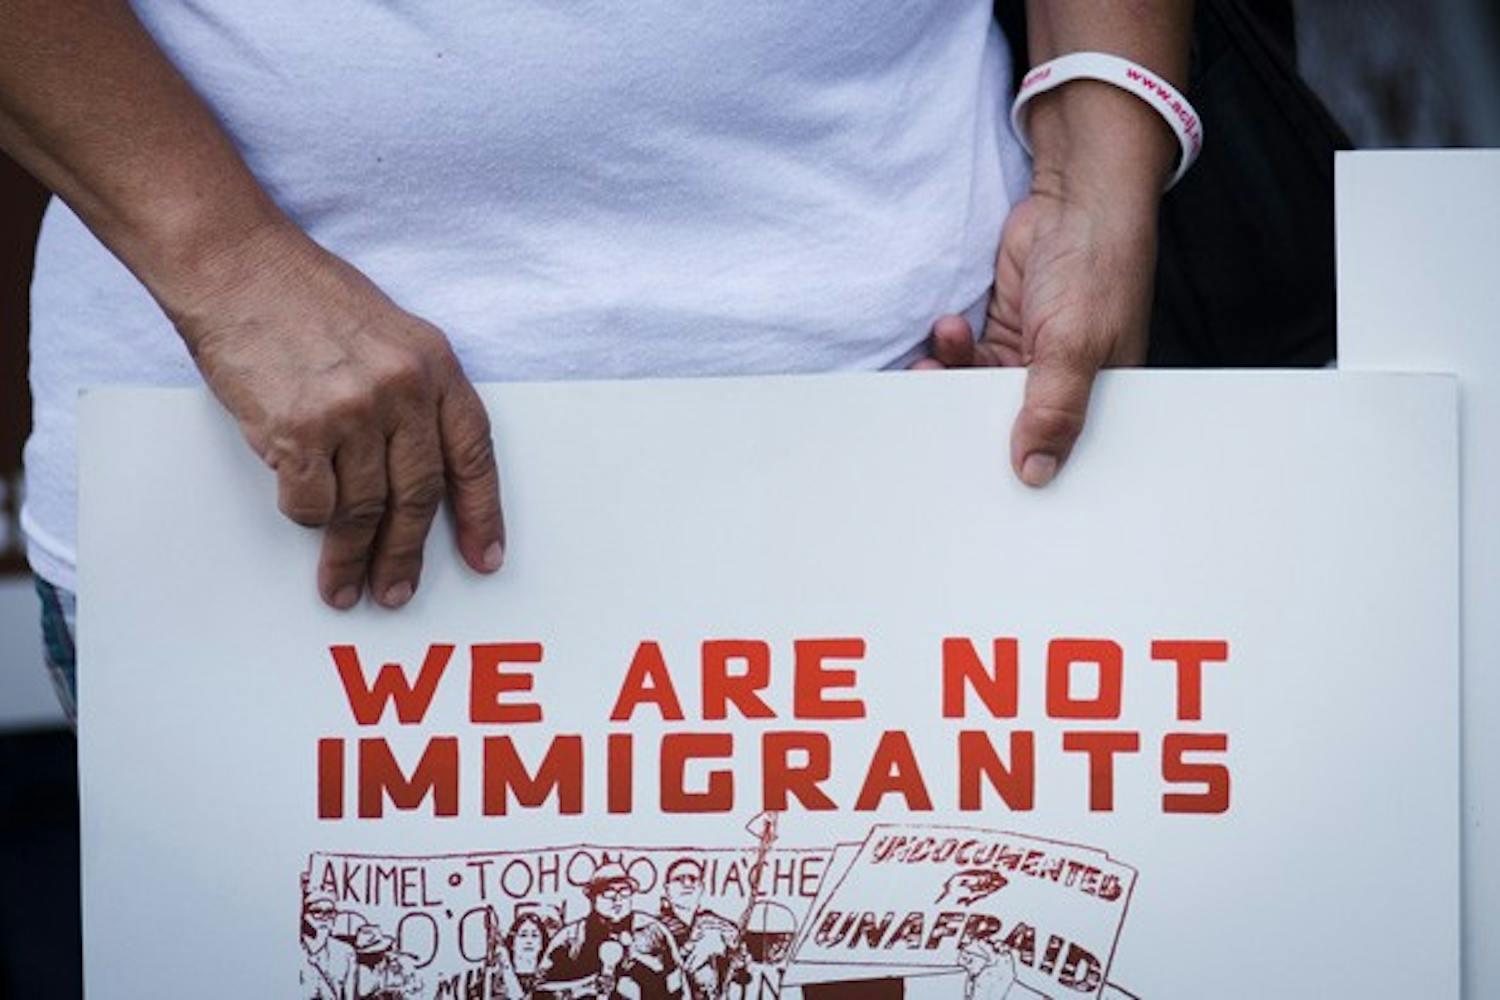 A protester holds an anti SB 1070 sign during a protest Sept. 19 outside of the Immigration and Customs Enforcement field office in downtown Phoenix. (Photo by Aaron Lavinsky)